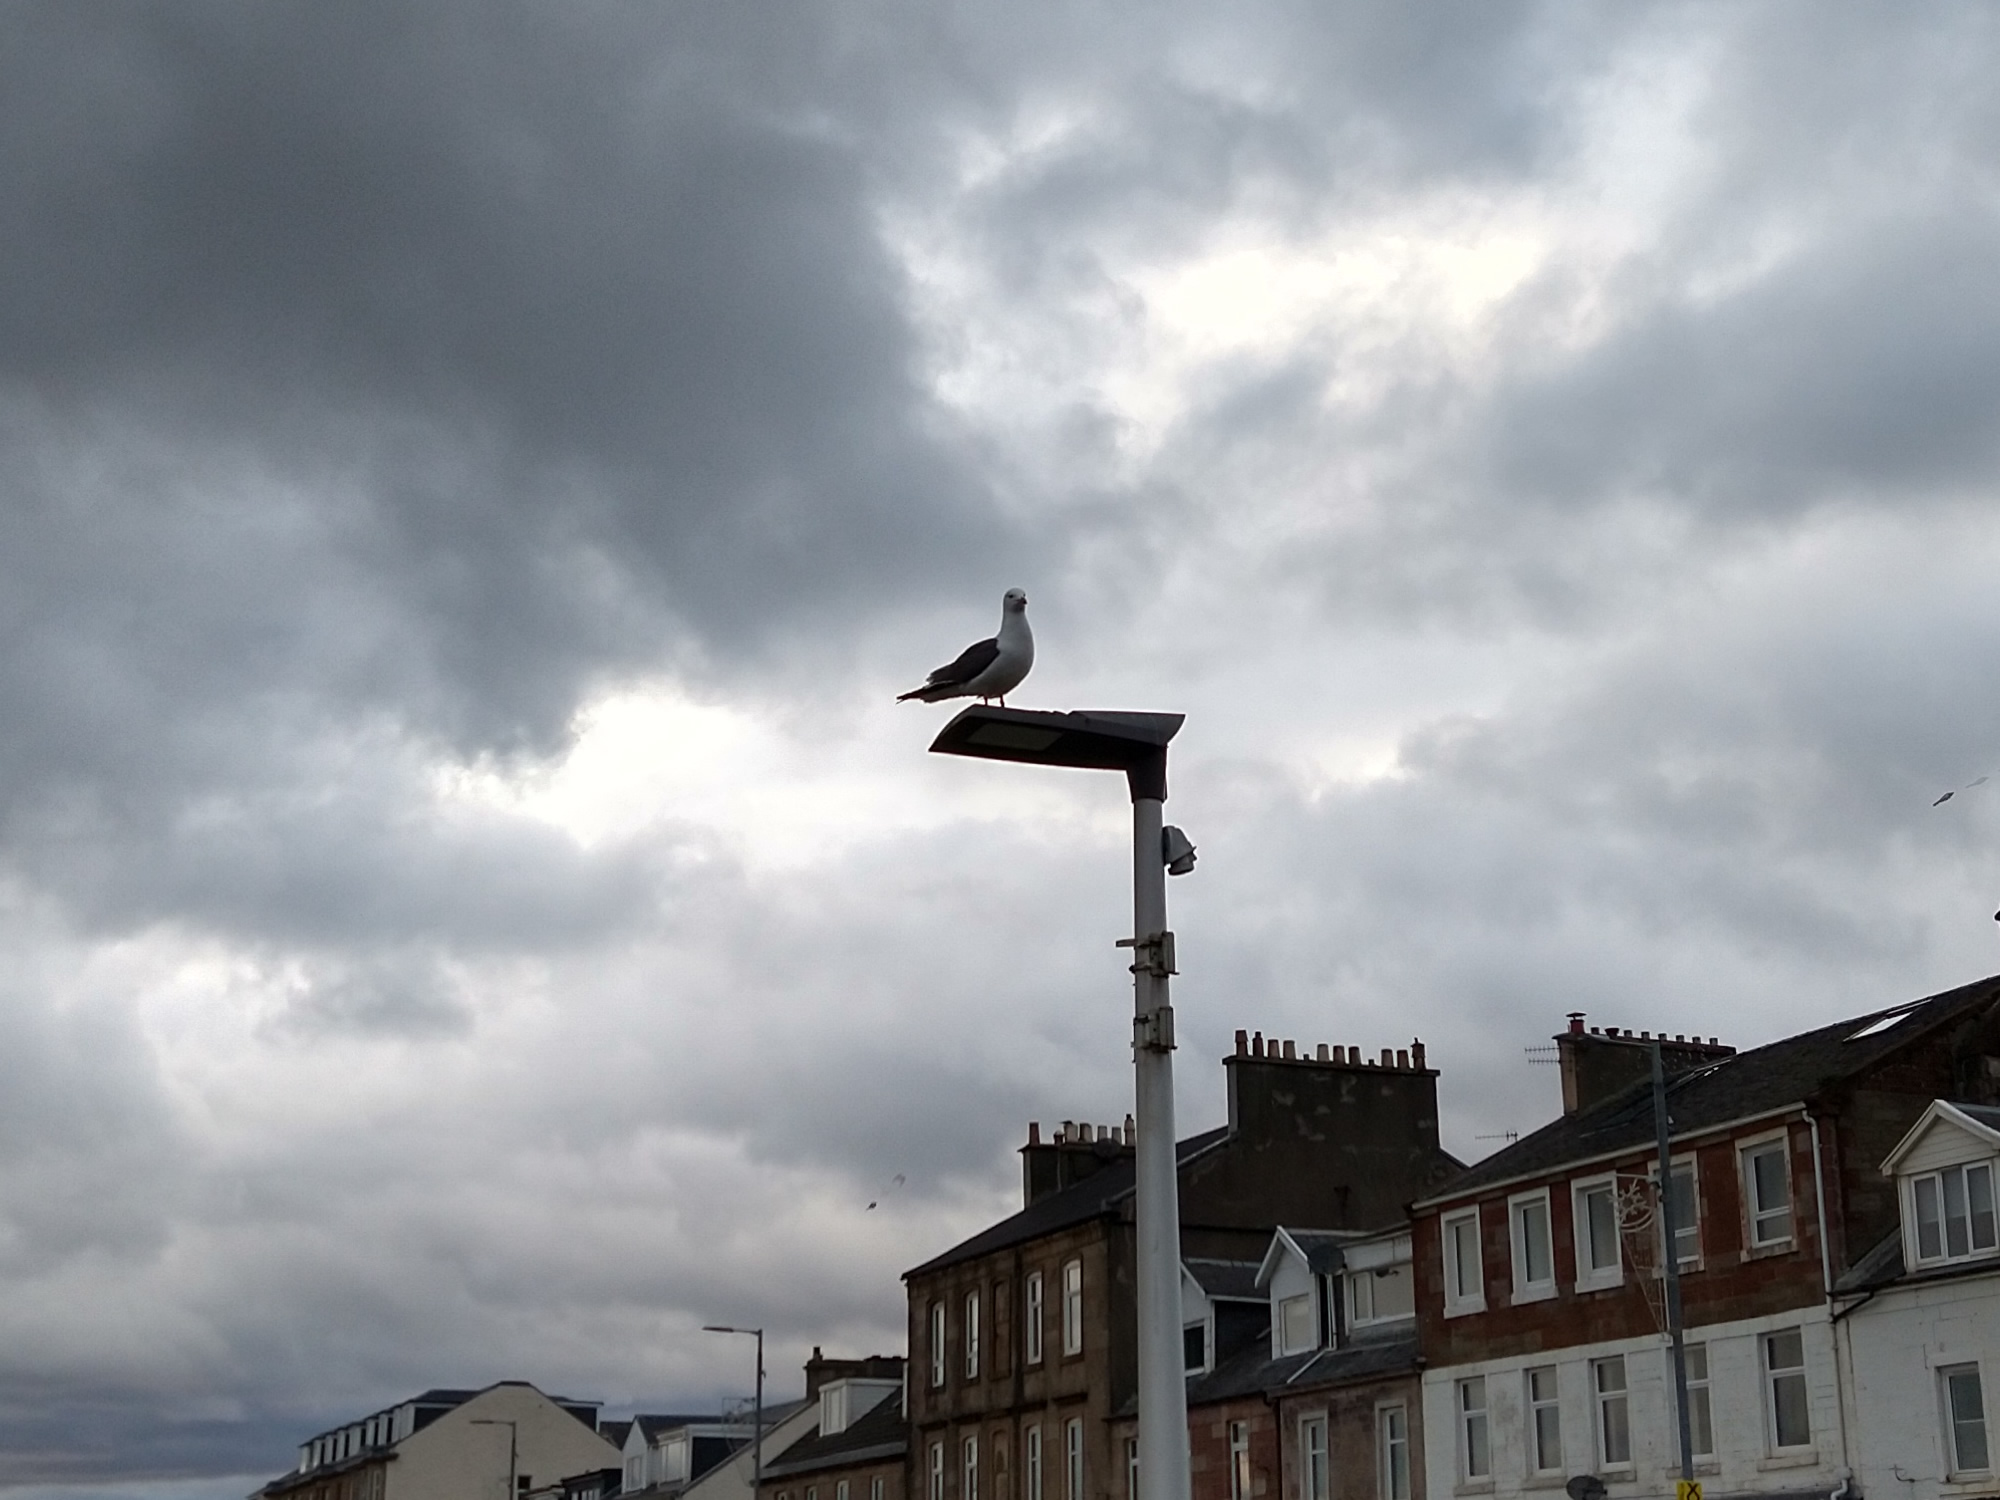 A seagull perched on a lamppost under a threatening sky by the riverside in Helensburgh